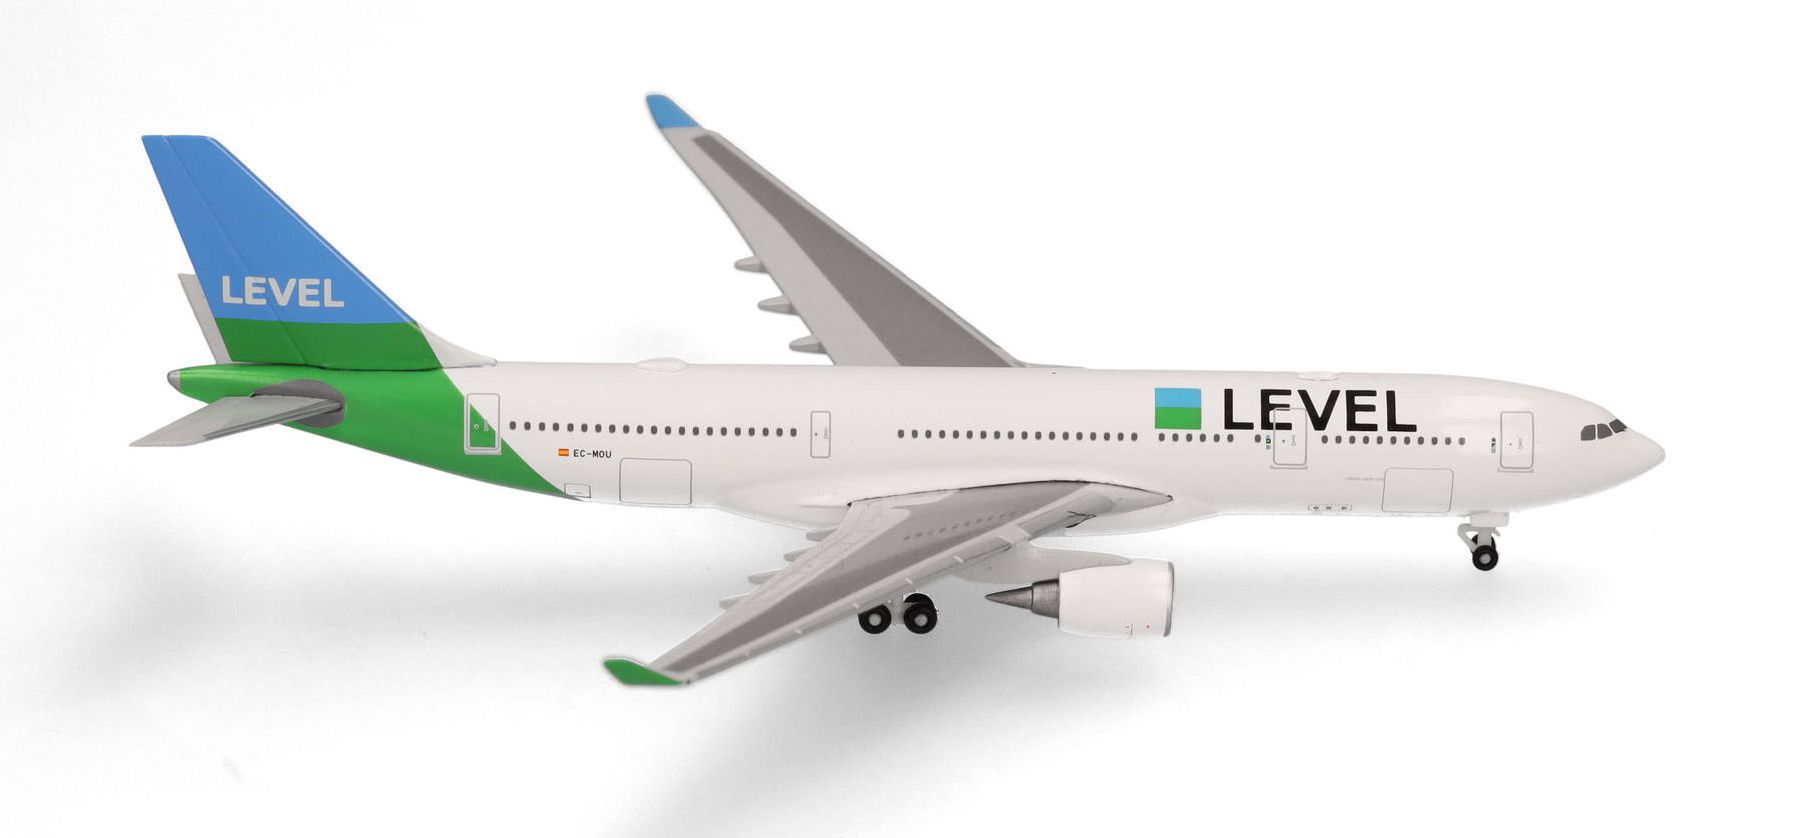 Herpa 537254 - Level Airbus A330-200